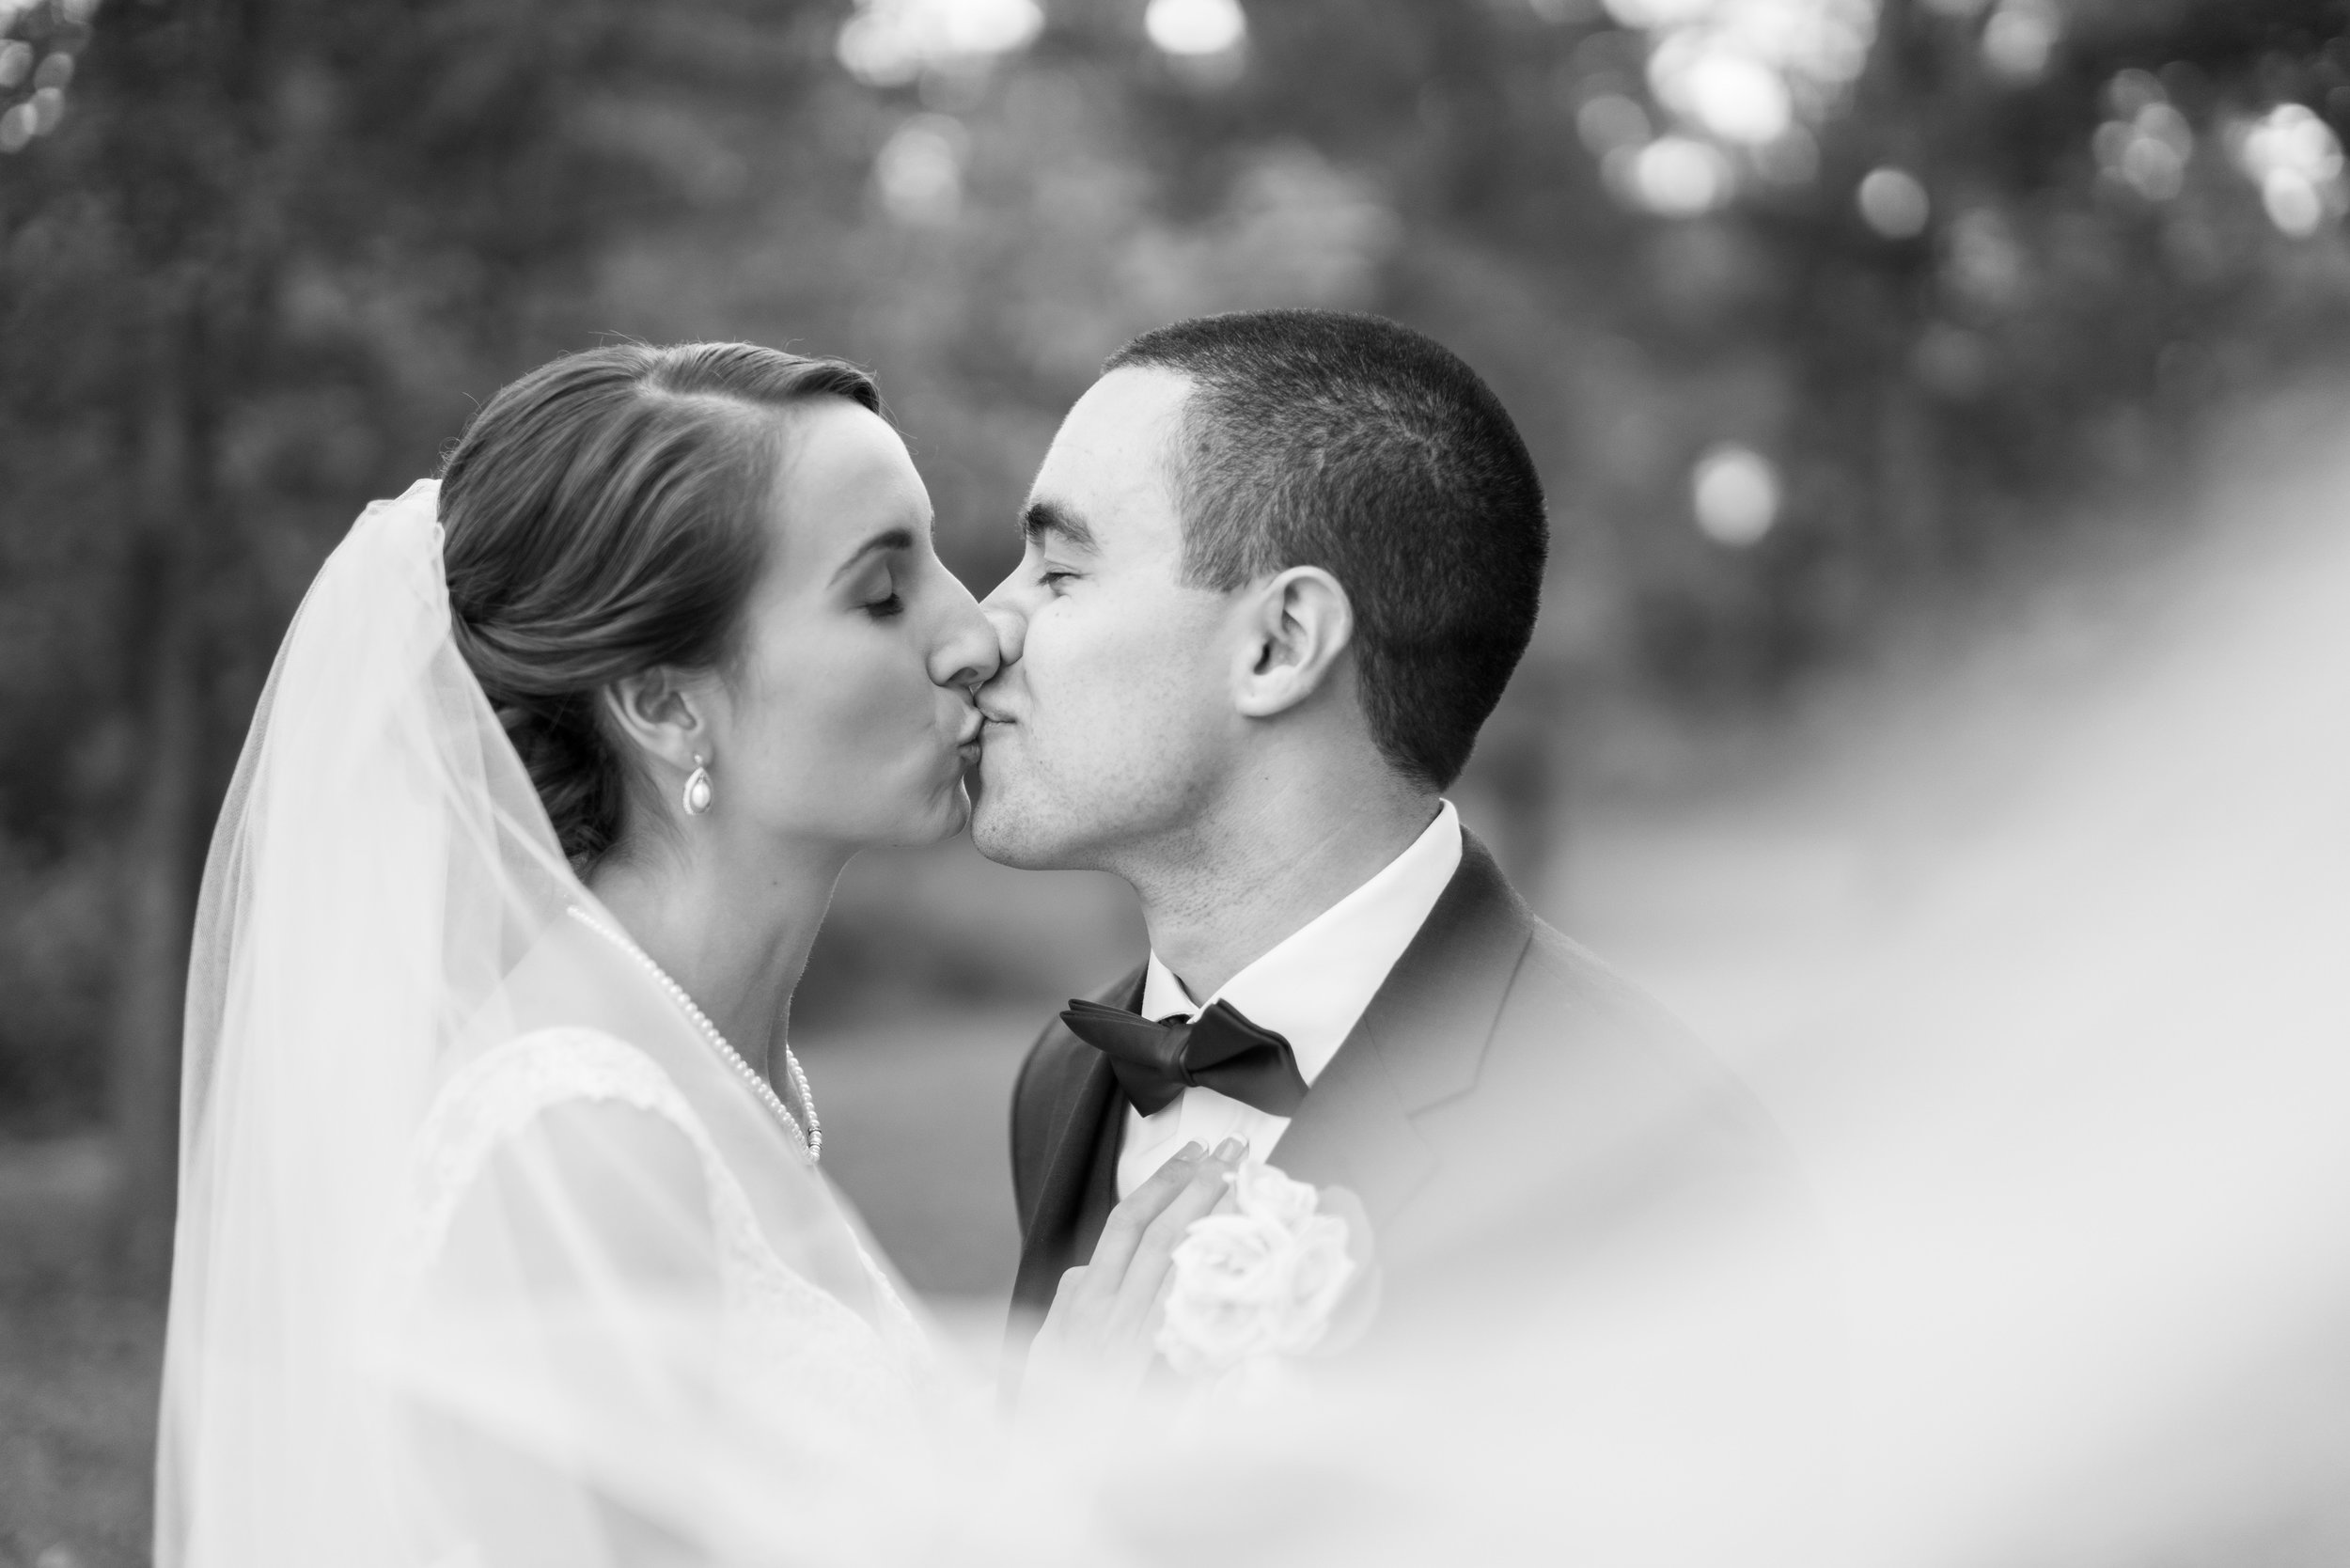 Black and white portrait of bride and groom kissing